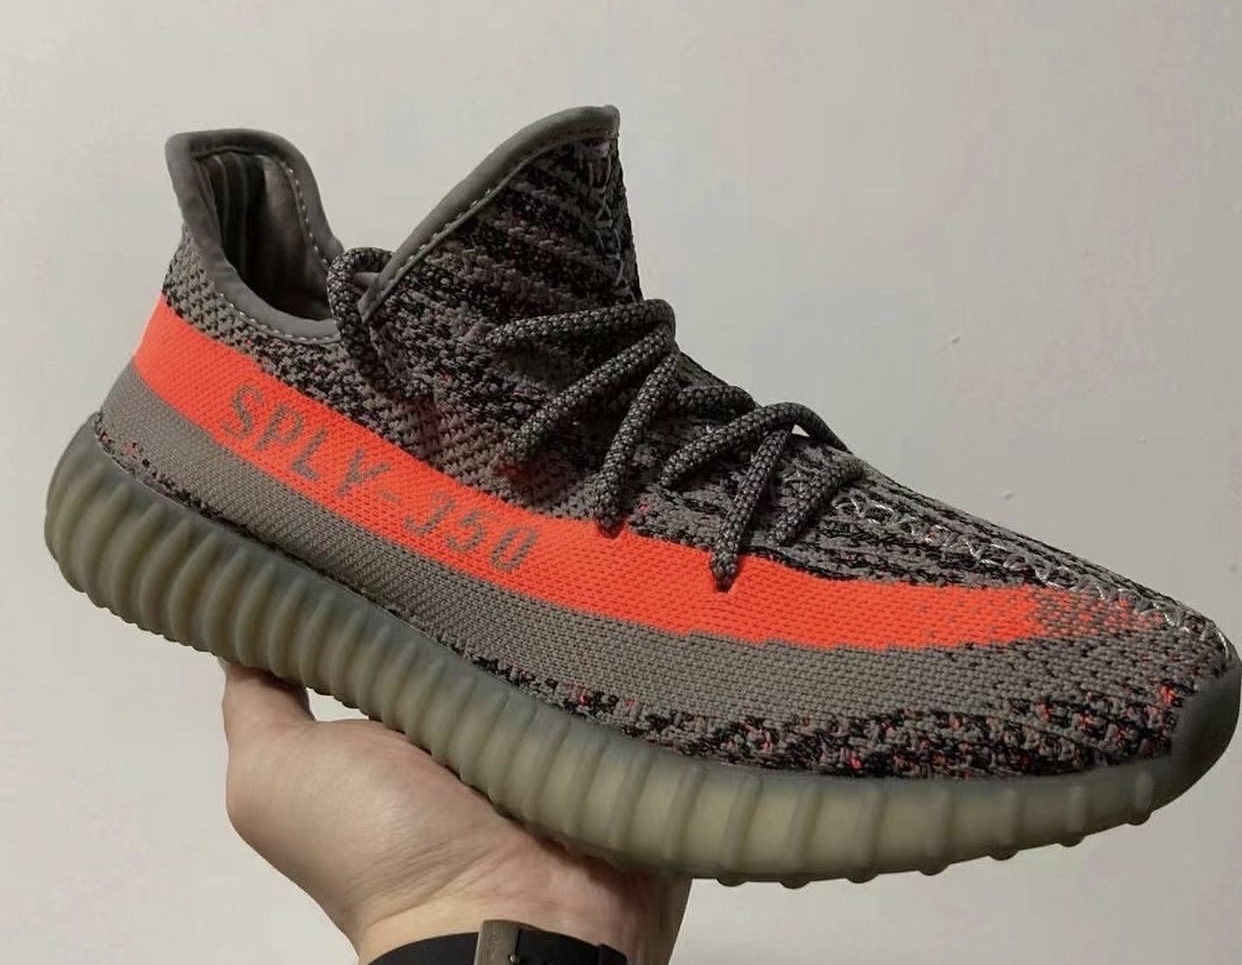 adidas Yeezy Boost 350 V2 Beluga Reflective Release Date positions Look